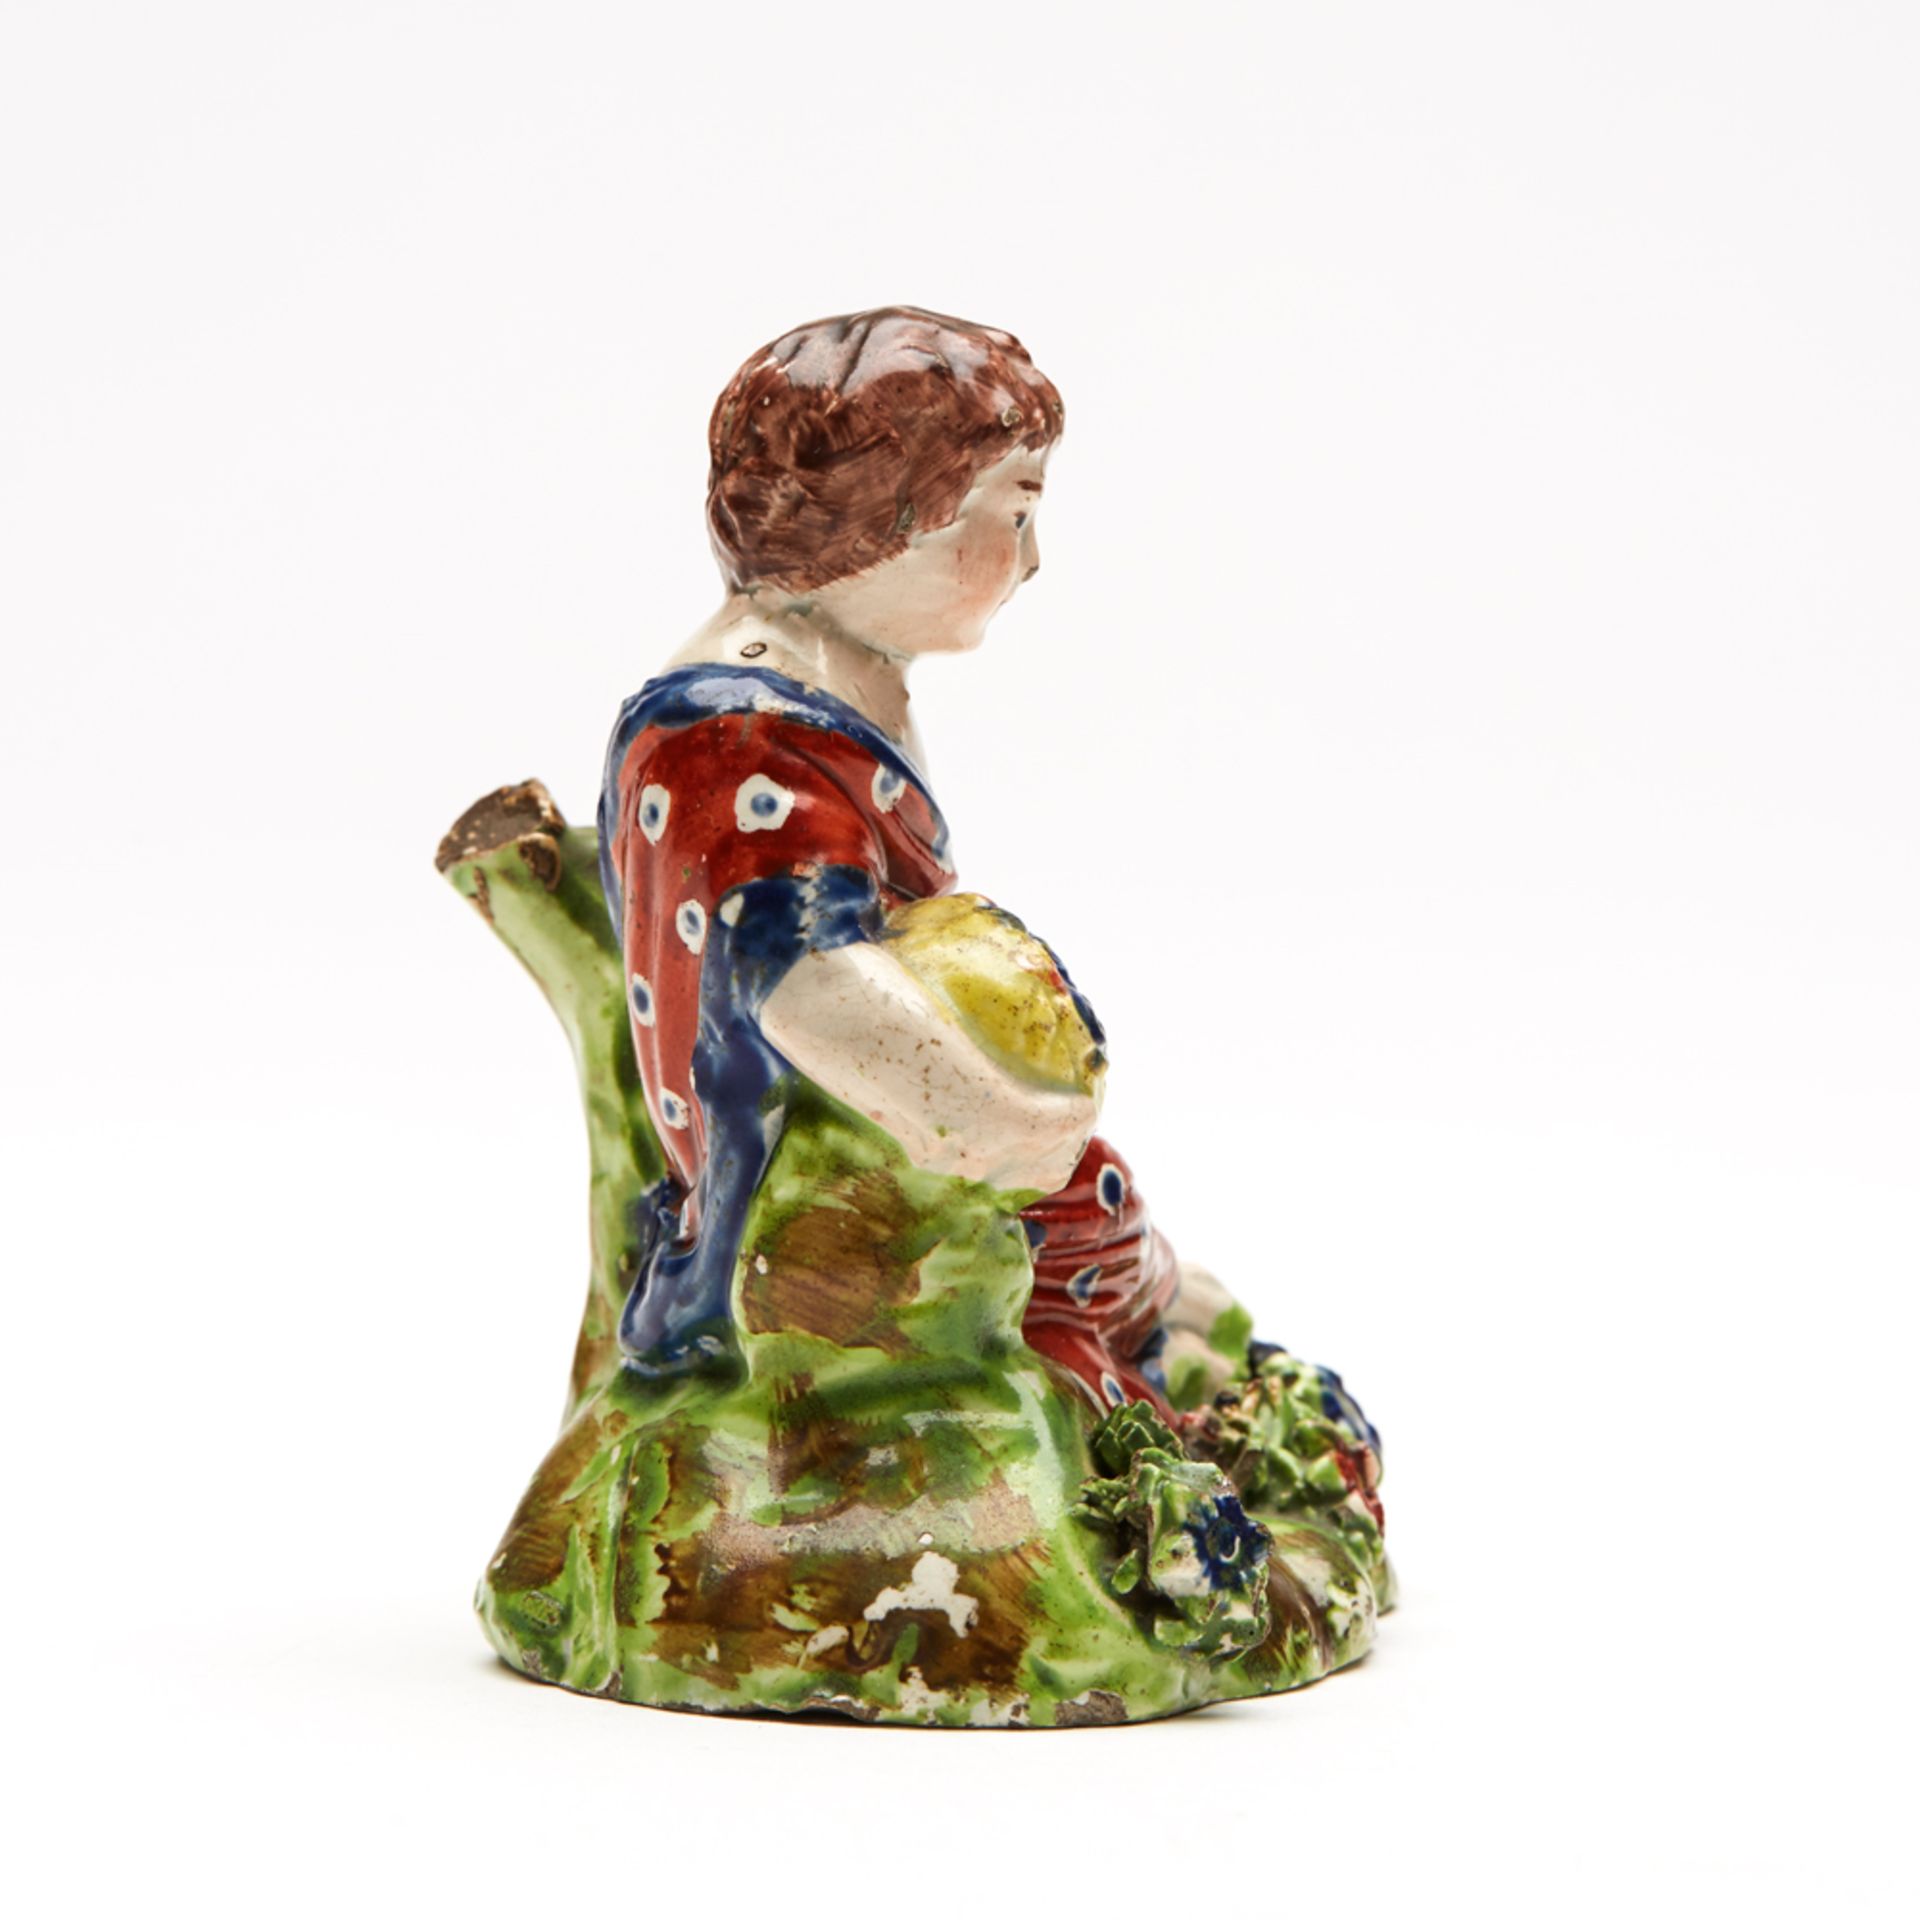 Antique Staffordshire Pearlware Seated Girl Figure C.1800 - Image 2 of 6